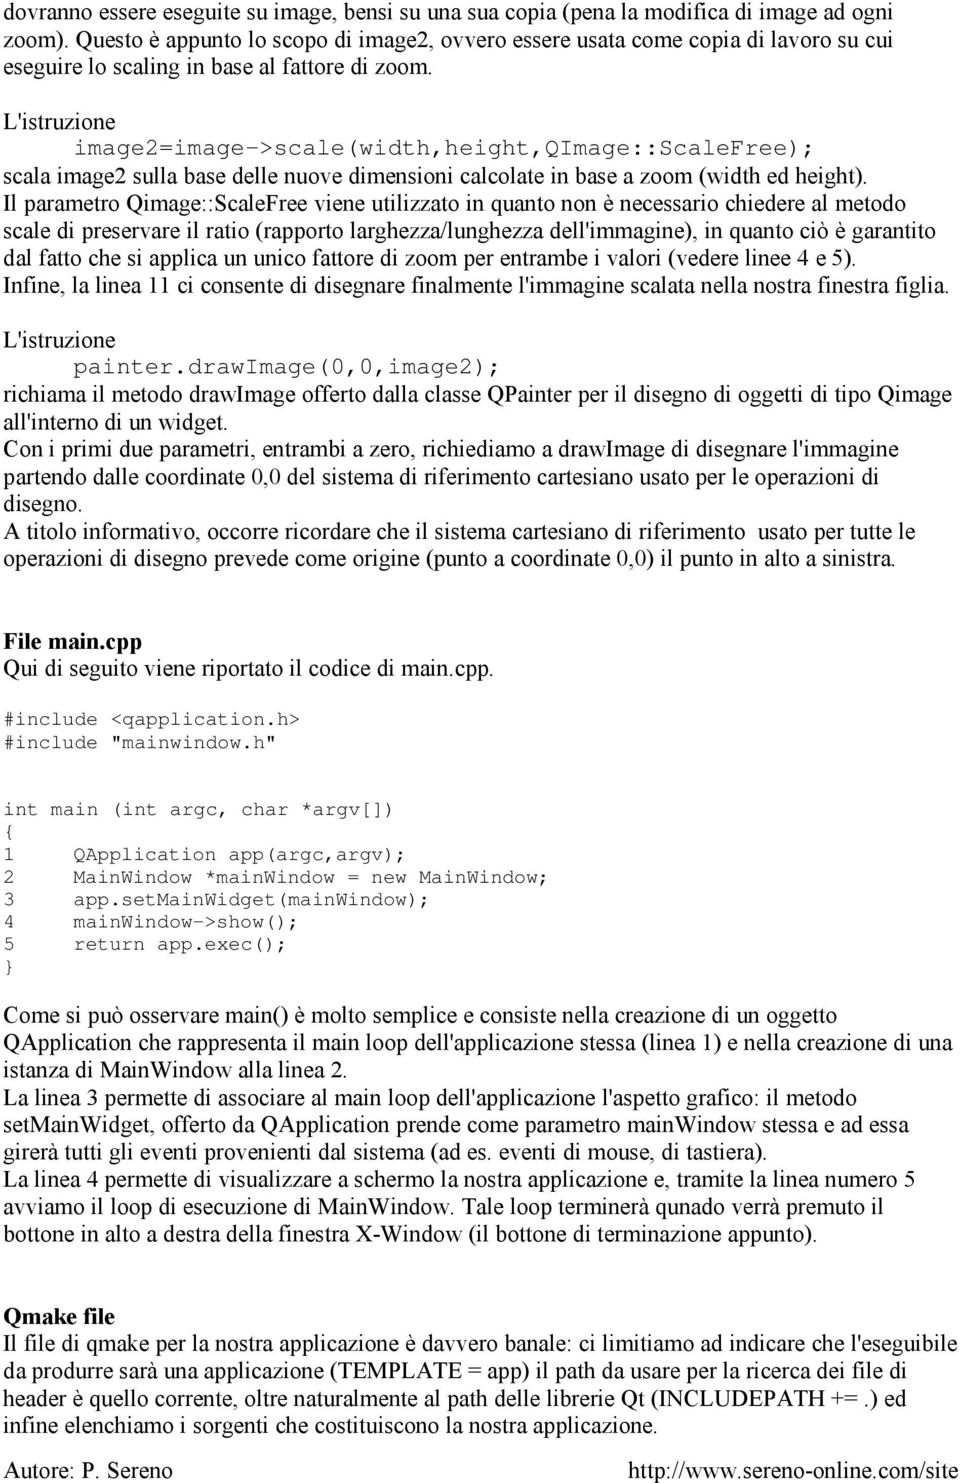 L'istruzione image2=image->scale(width,height,qimage::scalefree); scala image2 sulla base delle nuove dimensioni calcolate in base a zoom (width ed height).